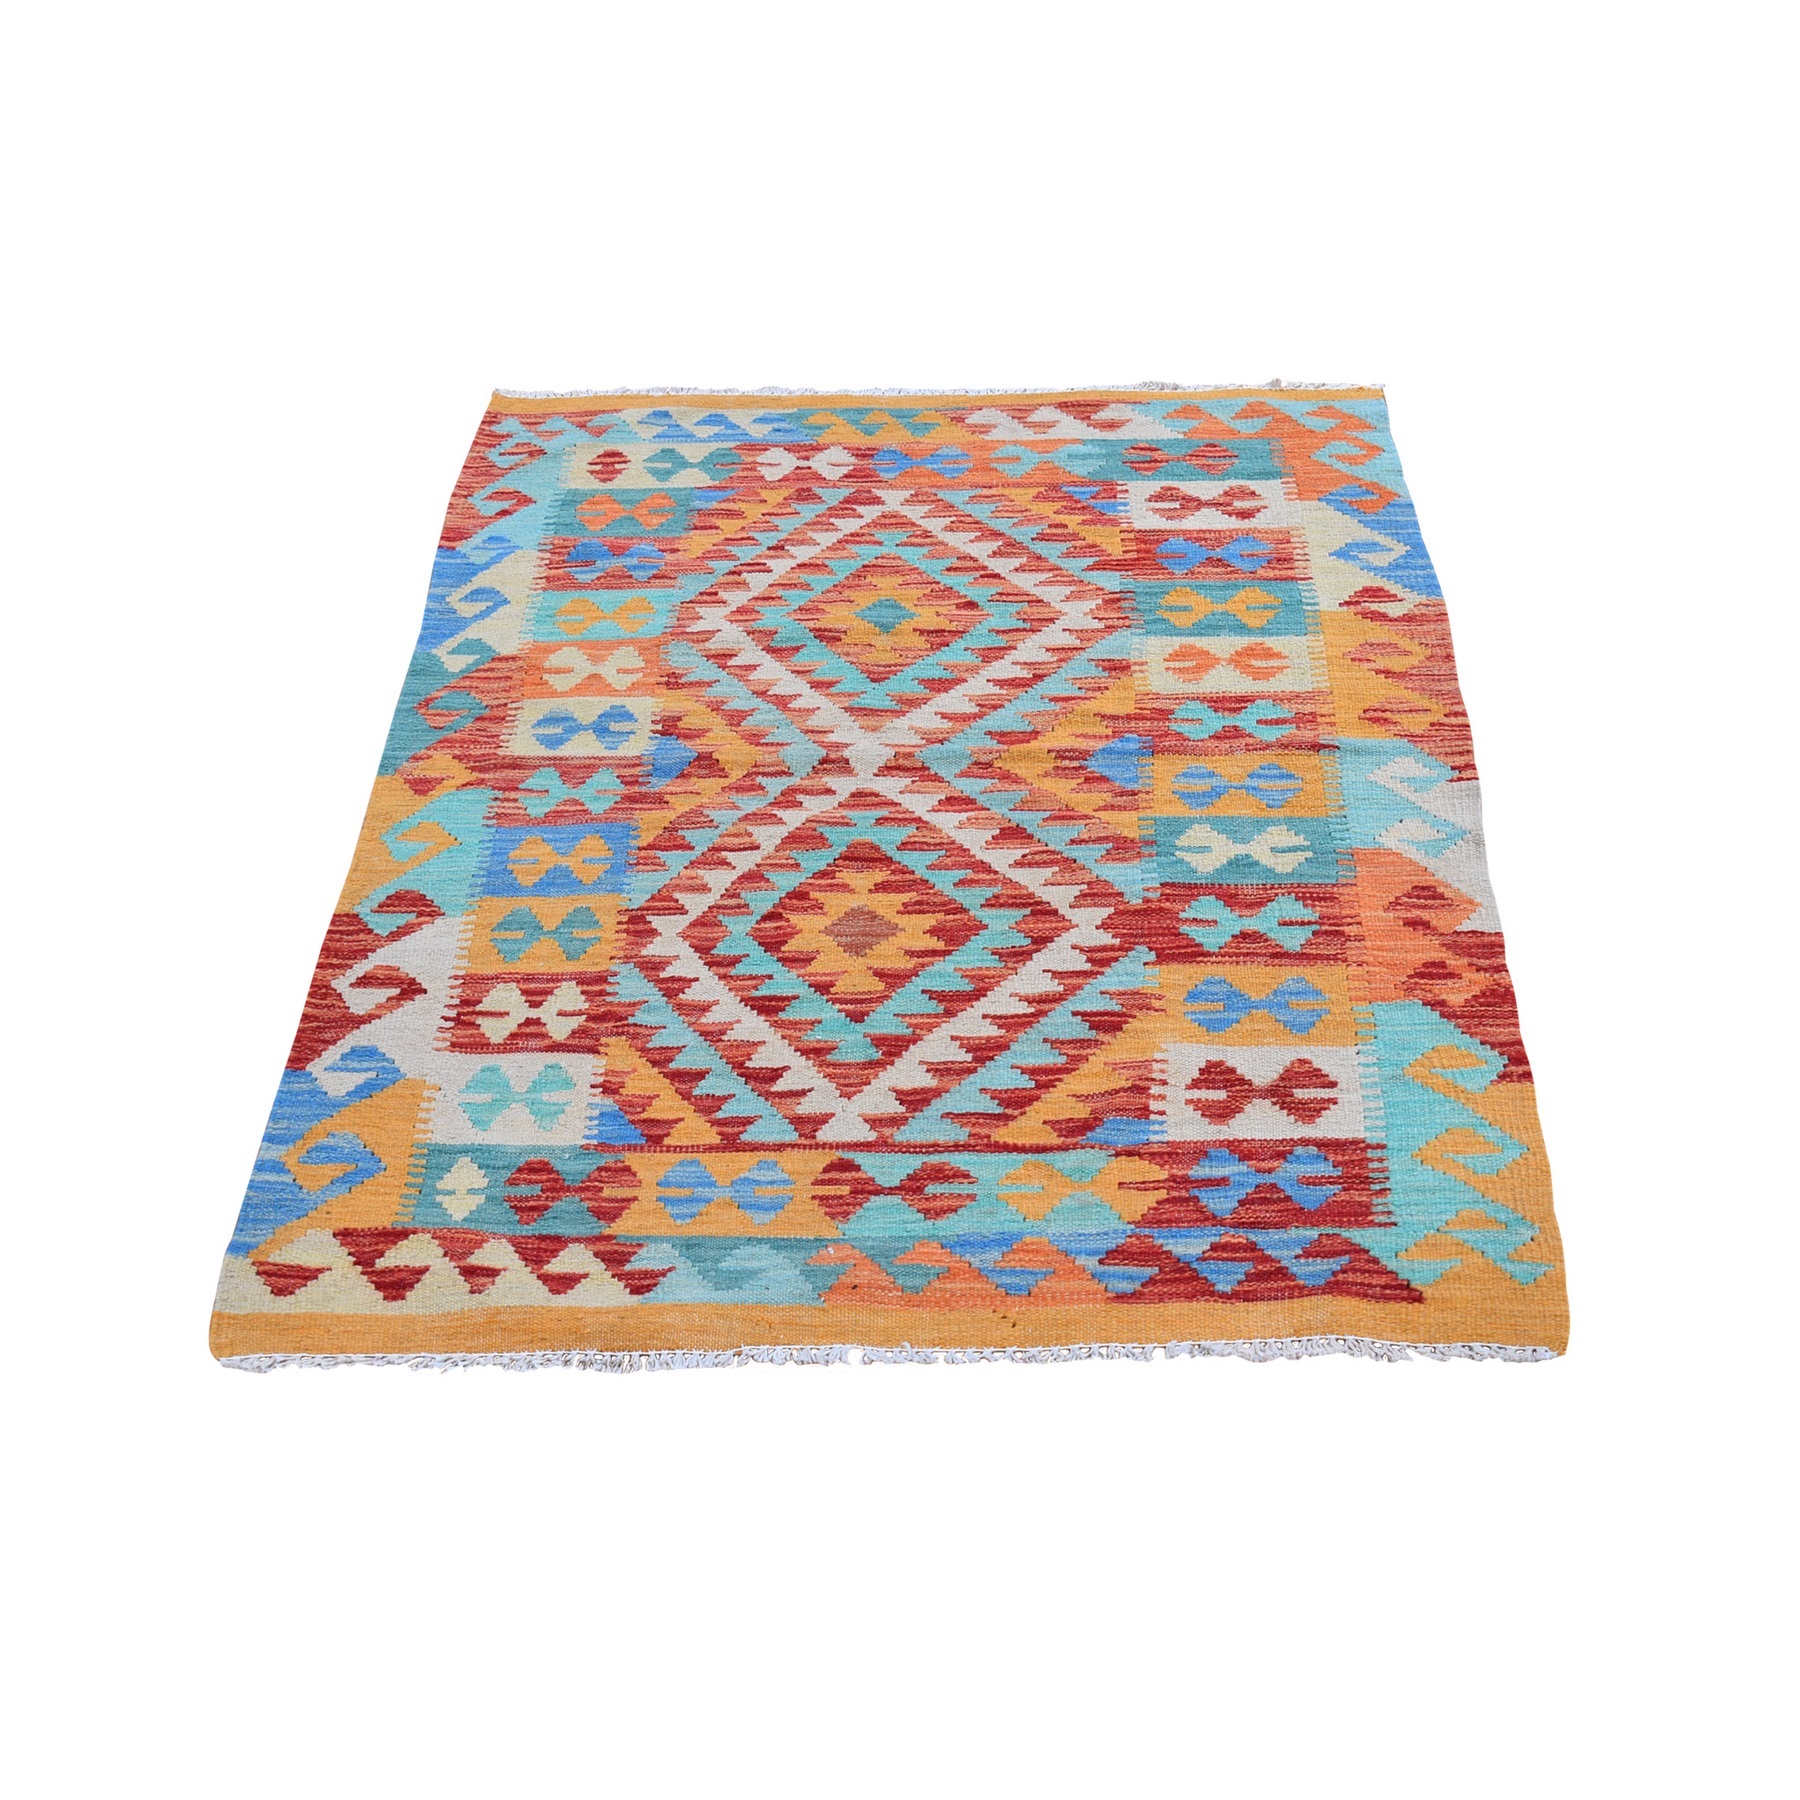 Traditional Wool Hand-Woven Area Rug 3'1